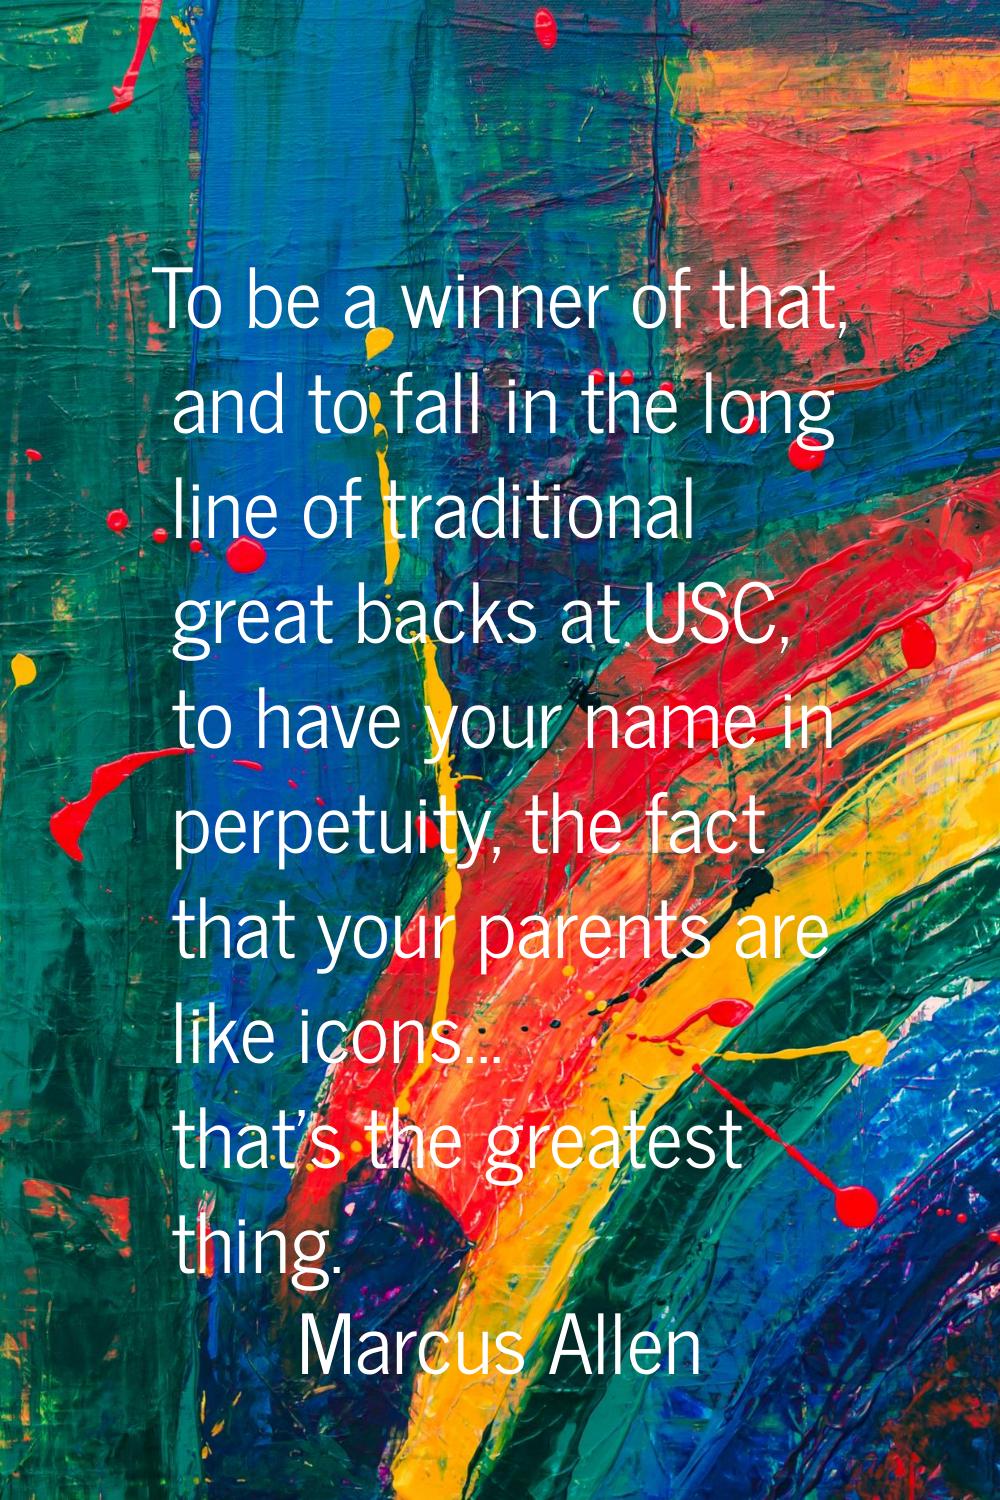 To be a winner of that, and to fall in the long line of traditional great backs at USC, to have you